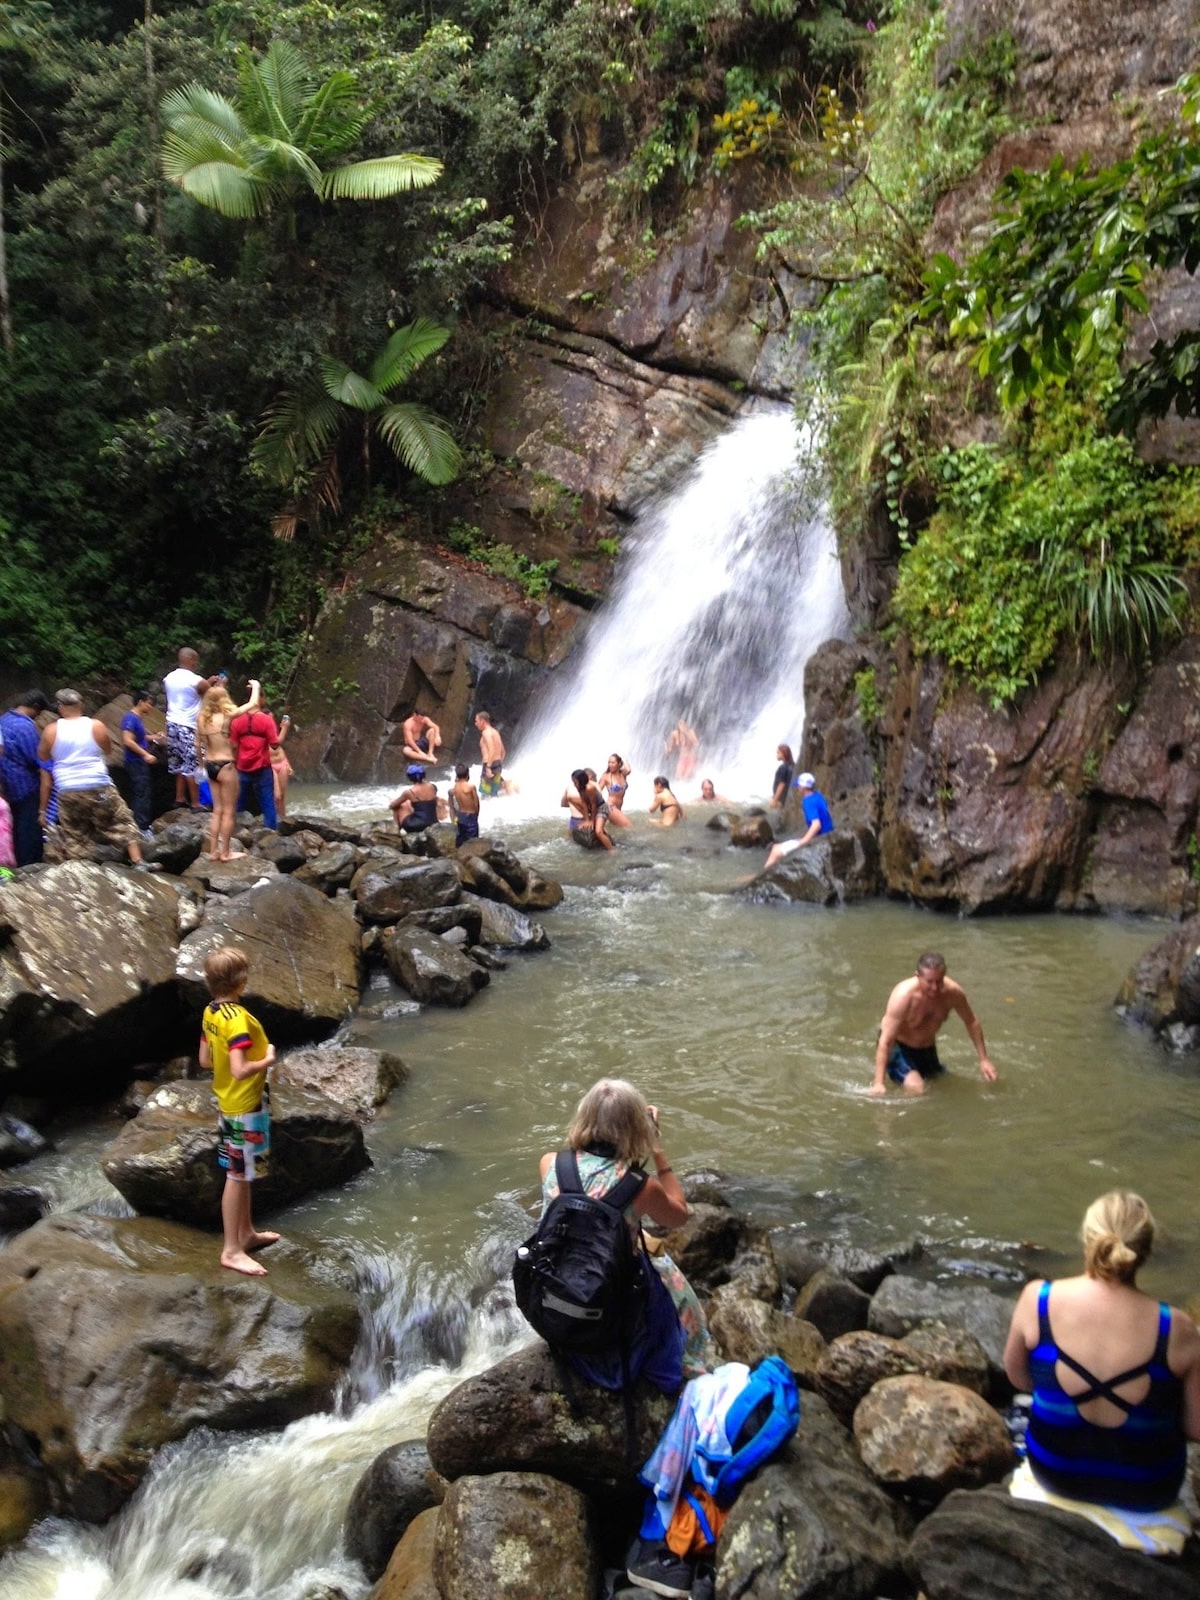 Waterfall with people swimming.